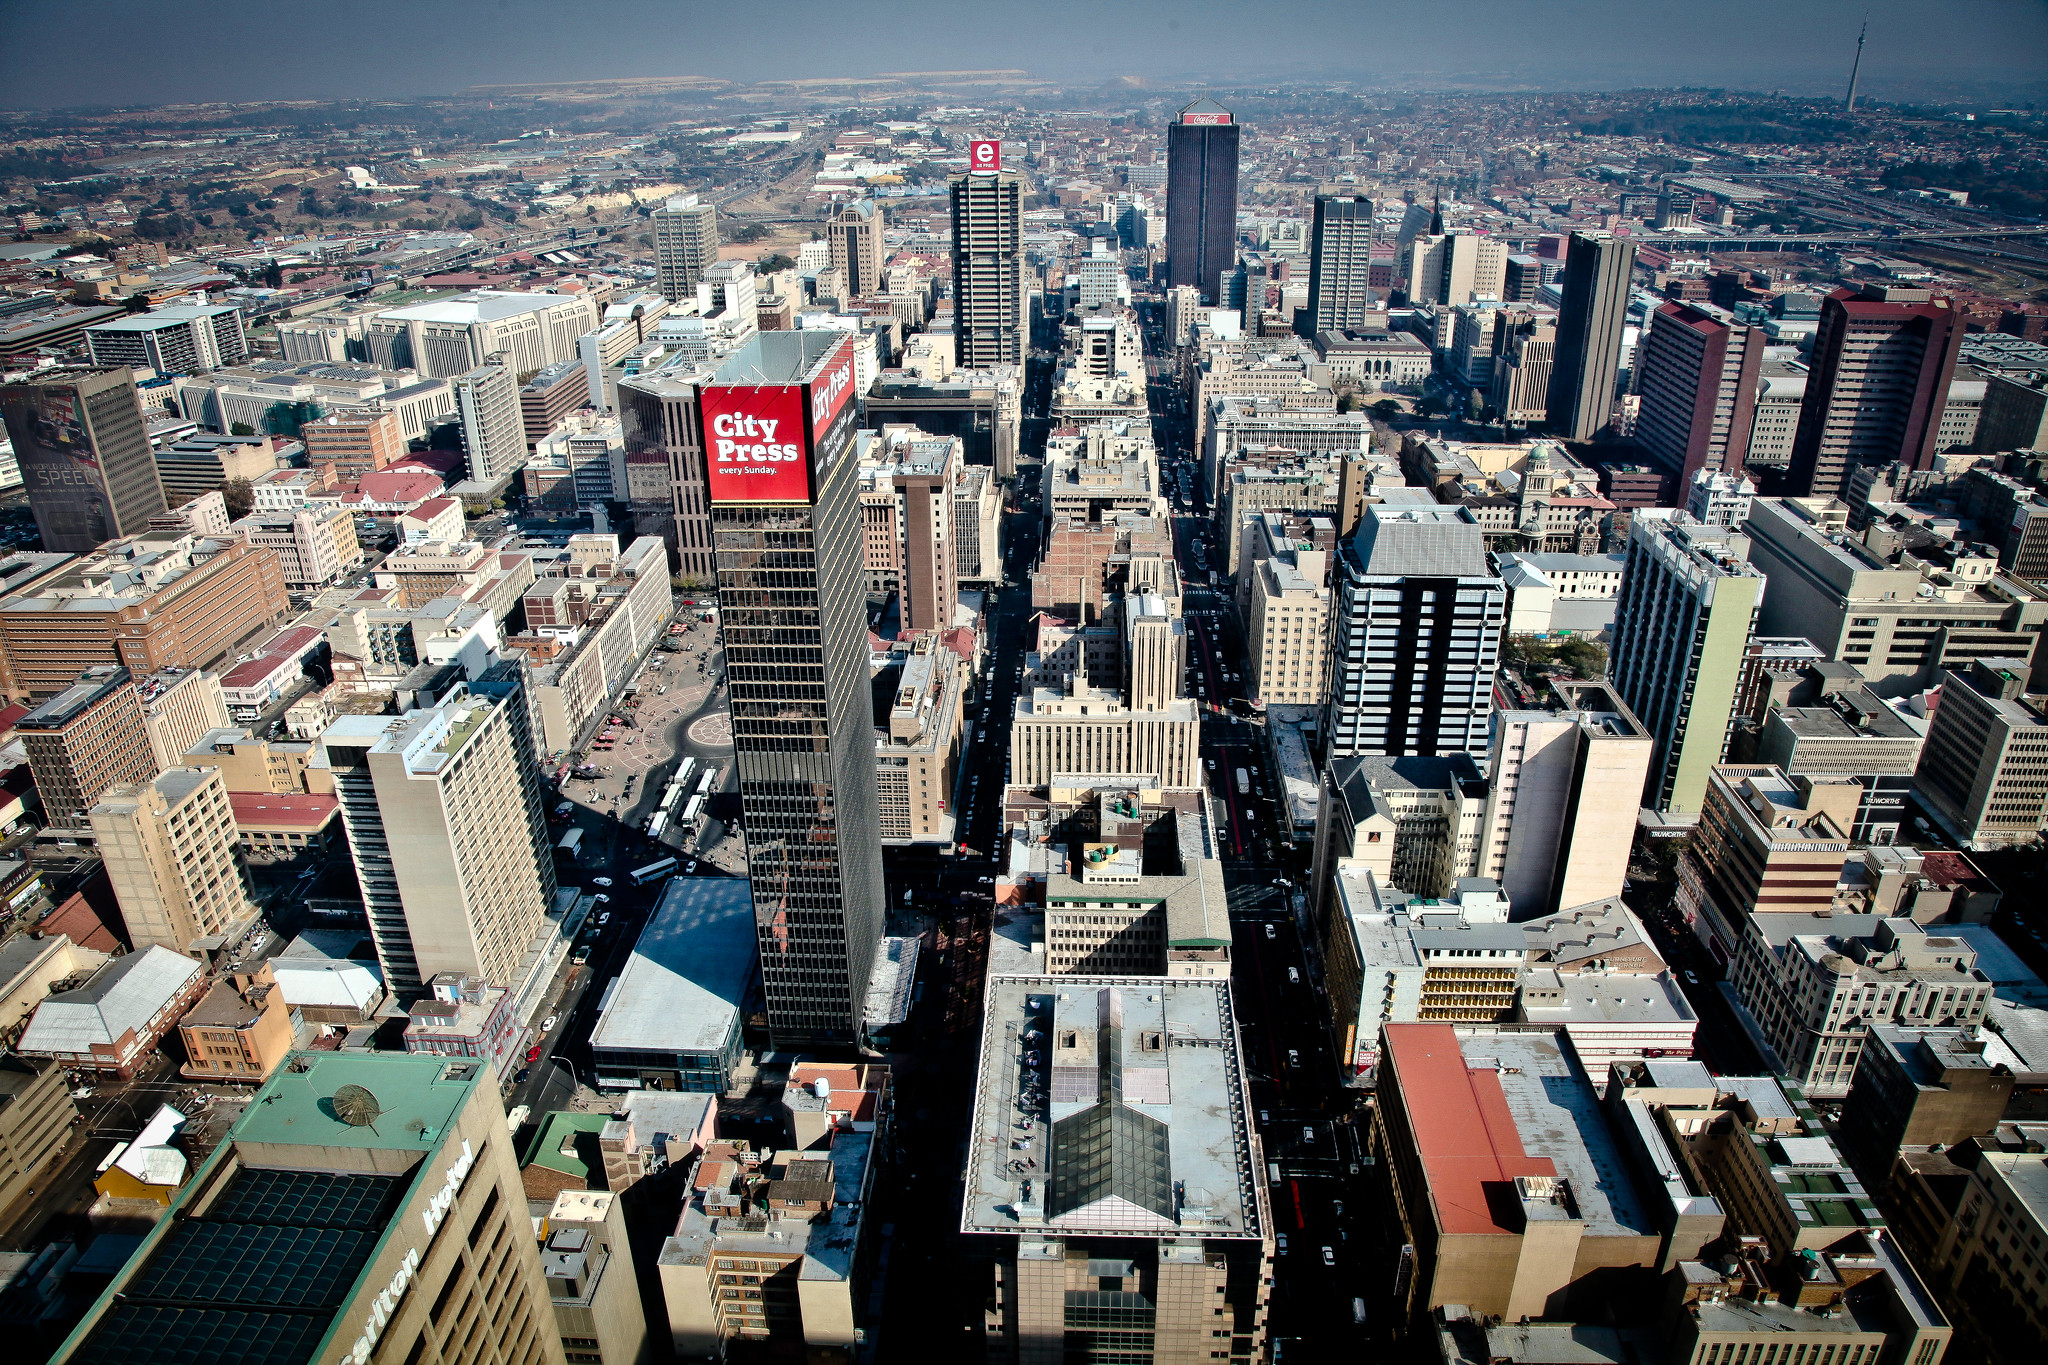 Modern day Johannesburg, South Africa. Seen from "Top Of Africa" tower - the highest building in Africa.